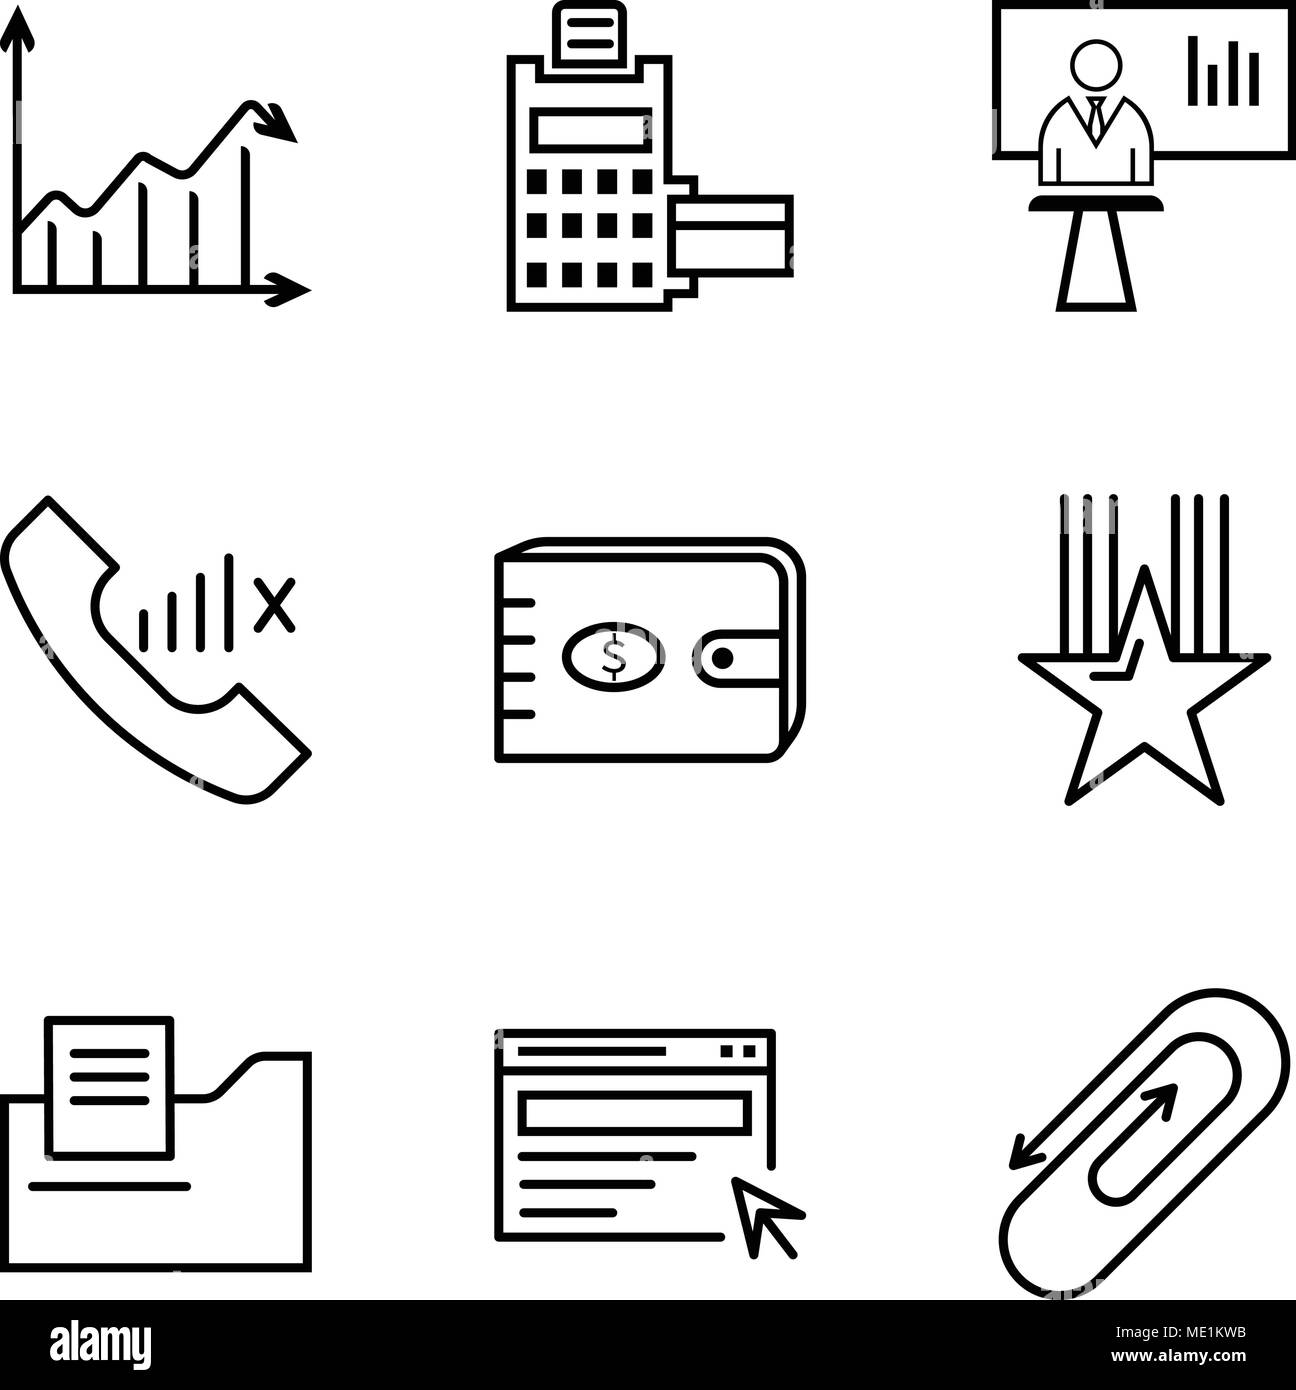 Set Of 9 simple editable icons such as clip, search, document folder, star, purse, slow network, news presenter, pos terminal, Arrow analytc, can be u Stock Vector